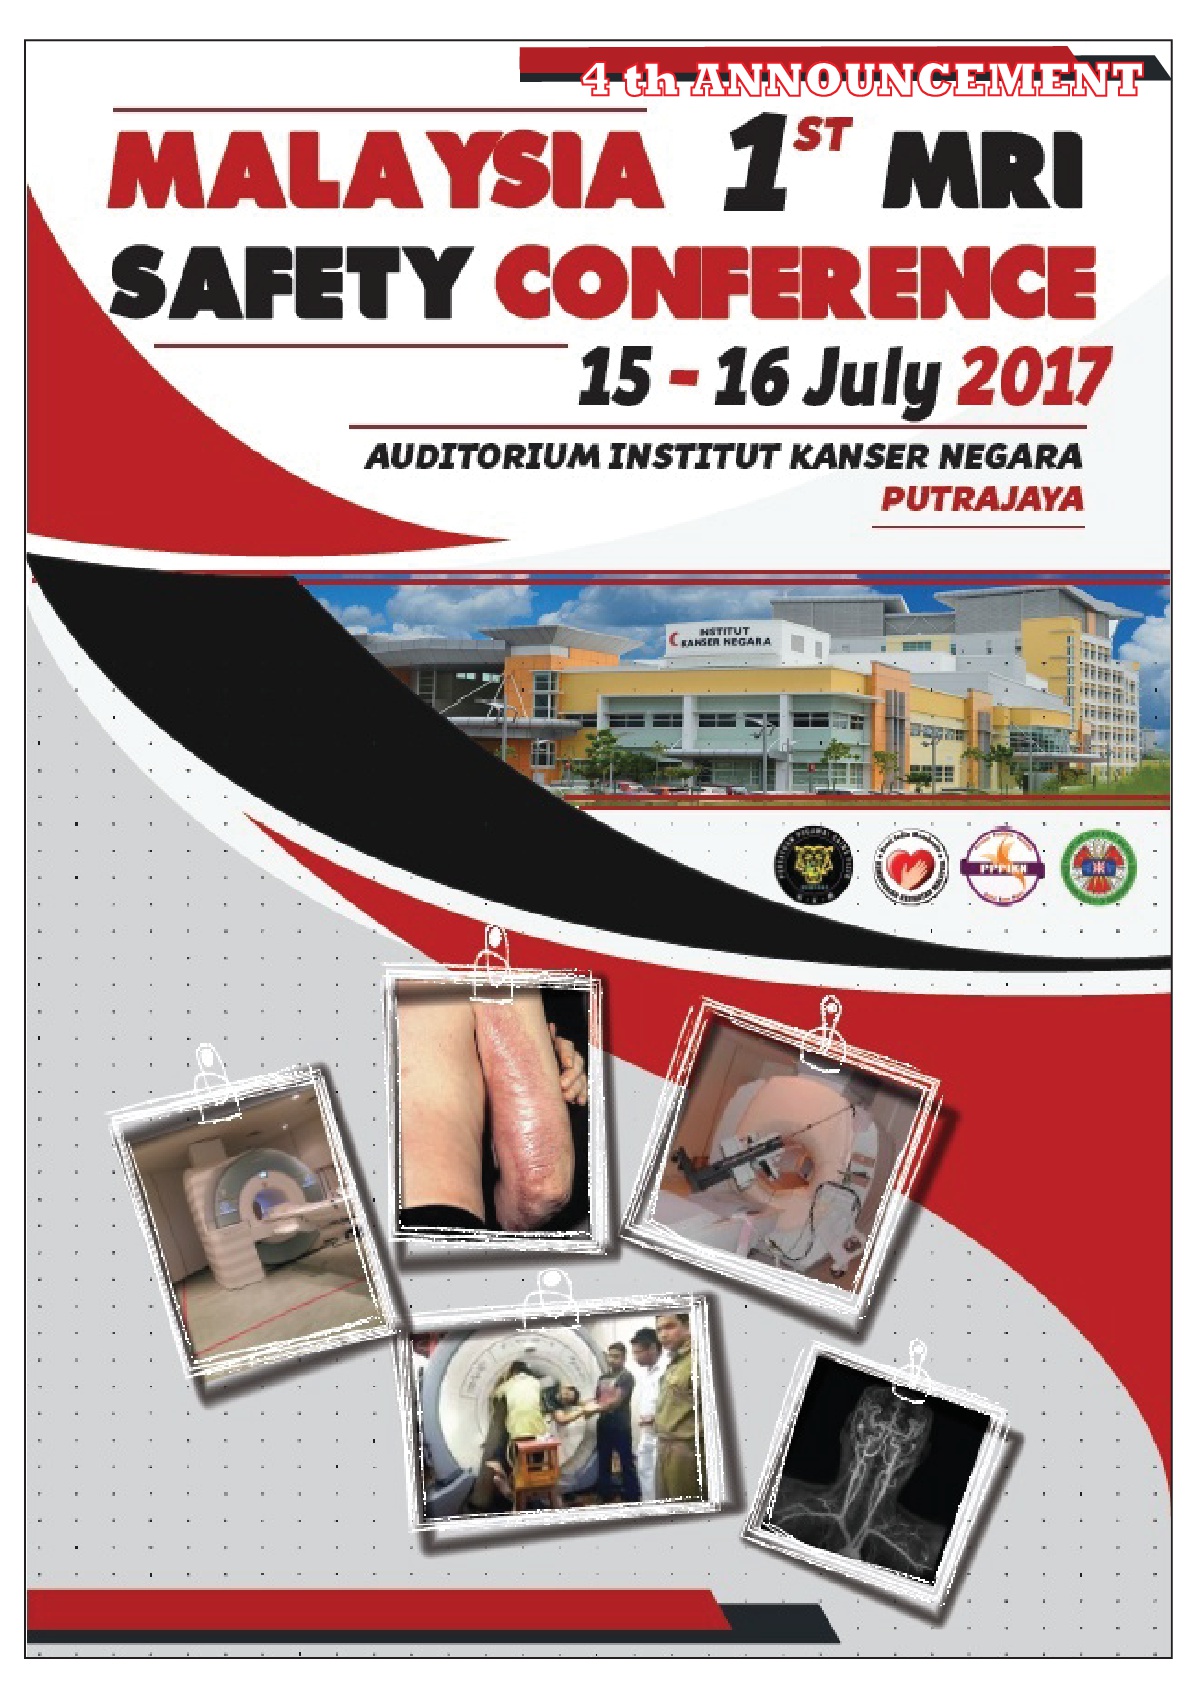 Malaysia-1st-MRI-Safety-Conference---4th-Annoucement-004